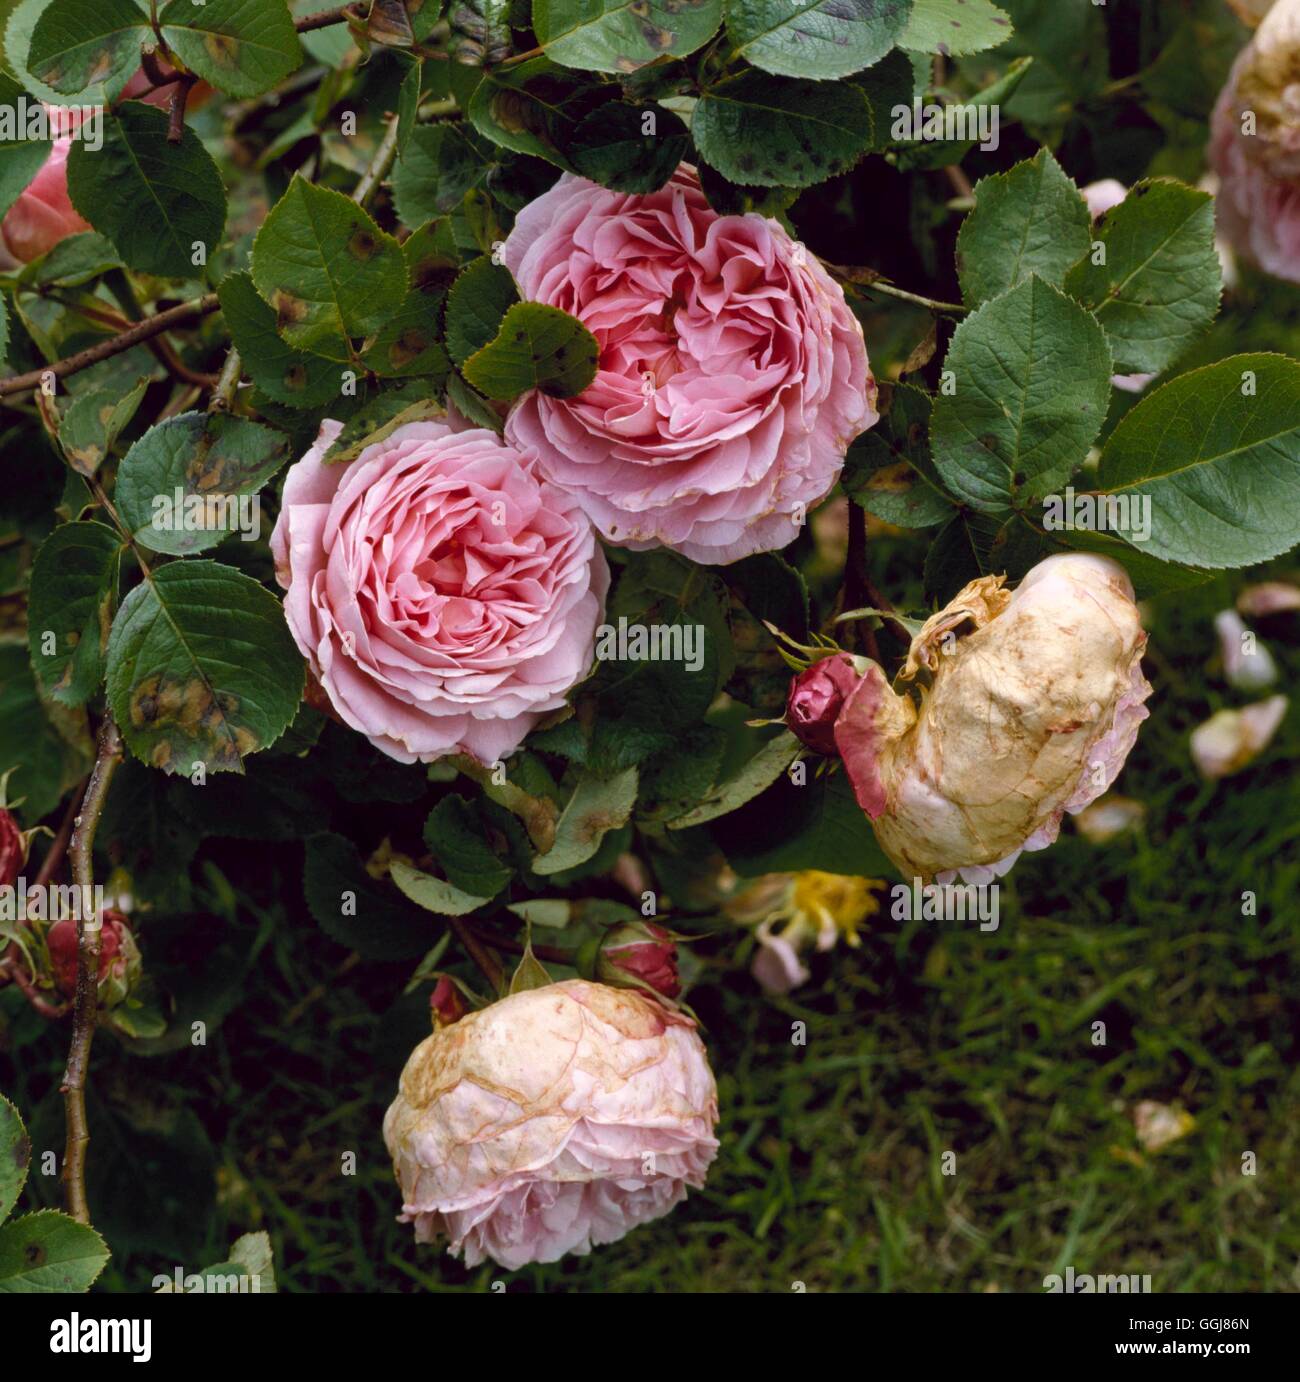 Balling - of Rosa `Constance Spry' due to wet weather.   DIS036163  /Photosho Stock Photo